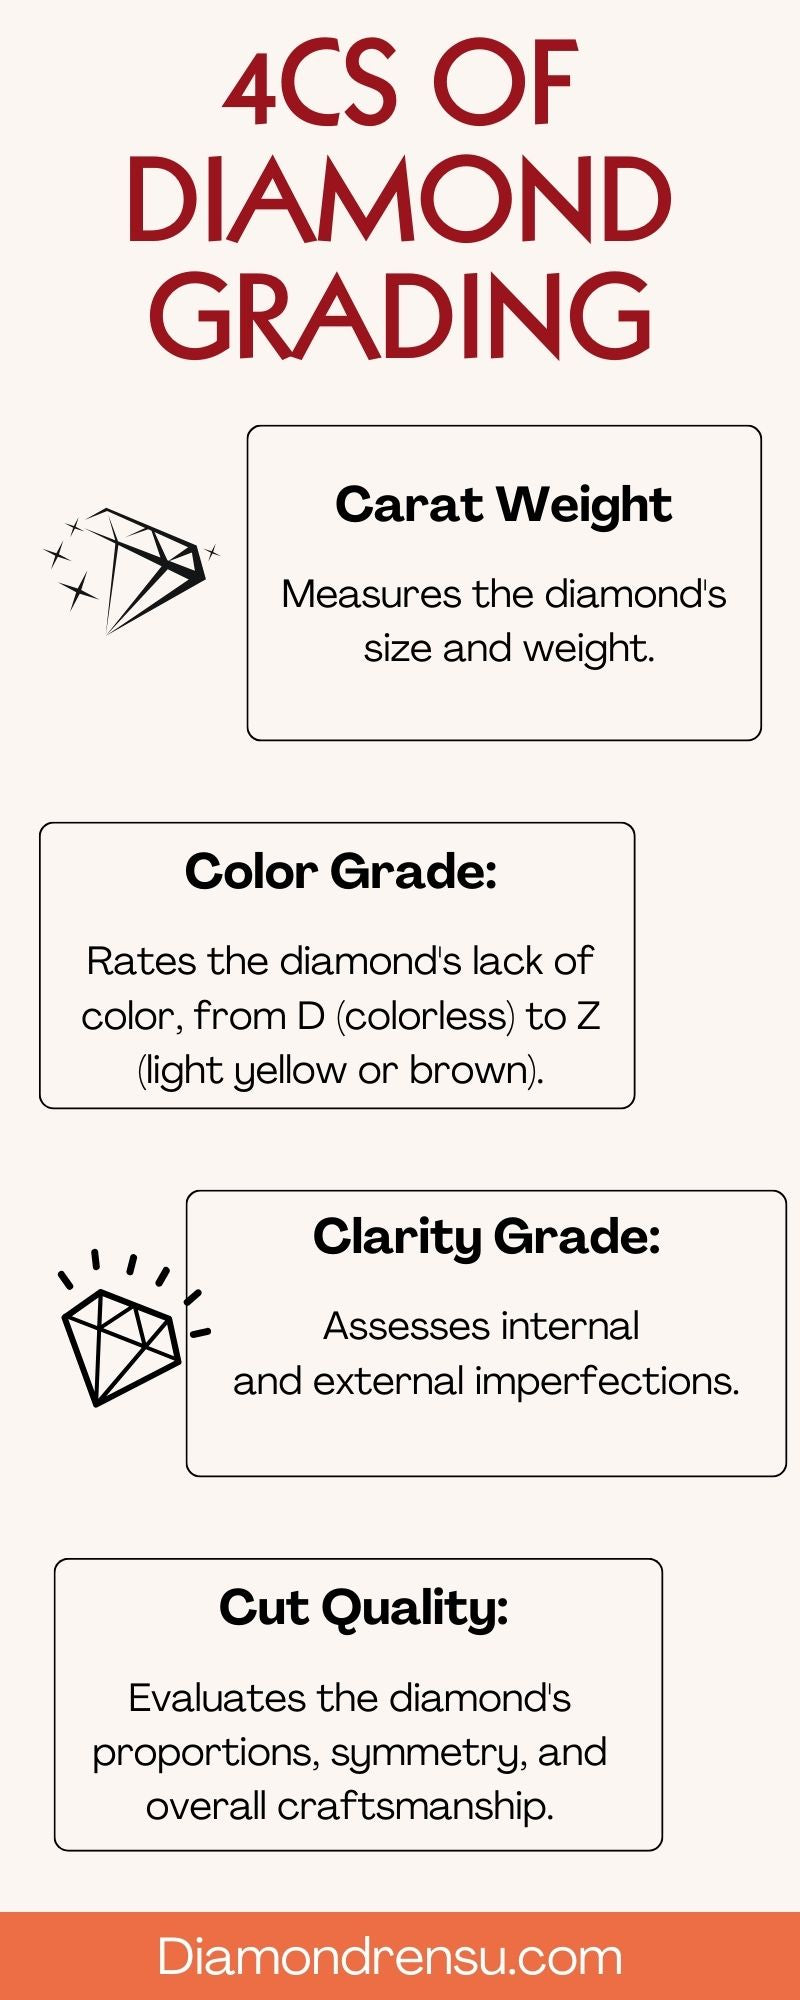 A chart showing how a diamond is graded on the basis of four characters